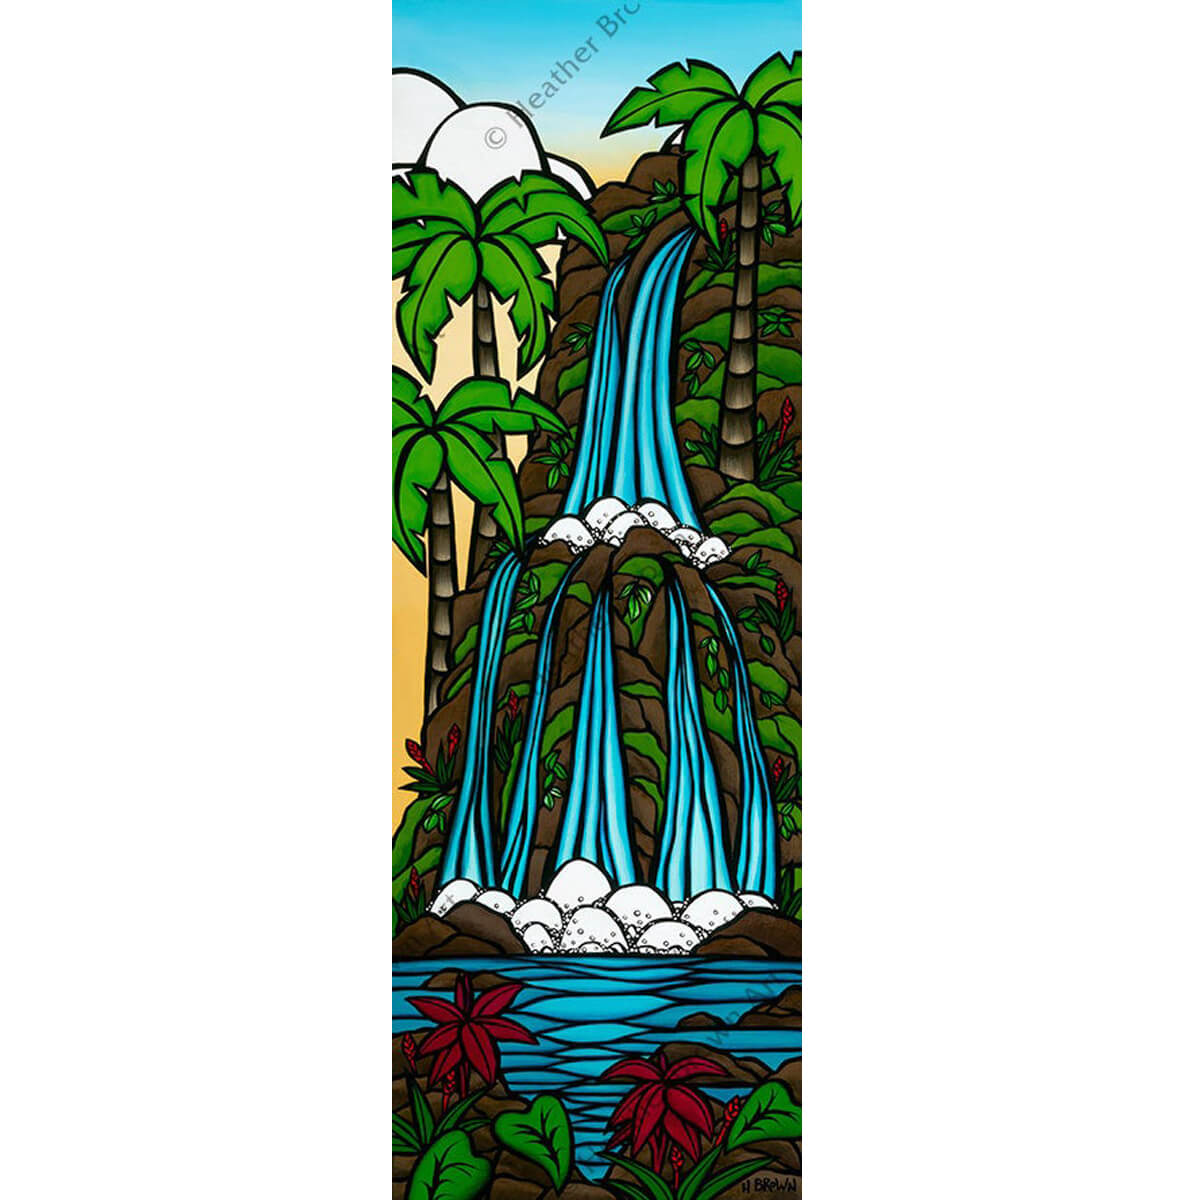 Sunrise Waterfall by Hawaii artist Heather Brown. This painting depicts an idyllic Hawaiian waterfall as it cascades into a foliage-lined pool at the bottom of the mountain.